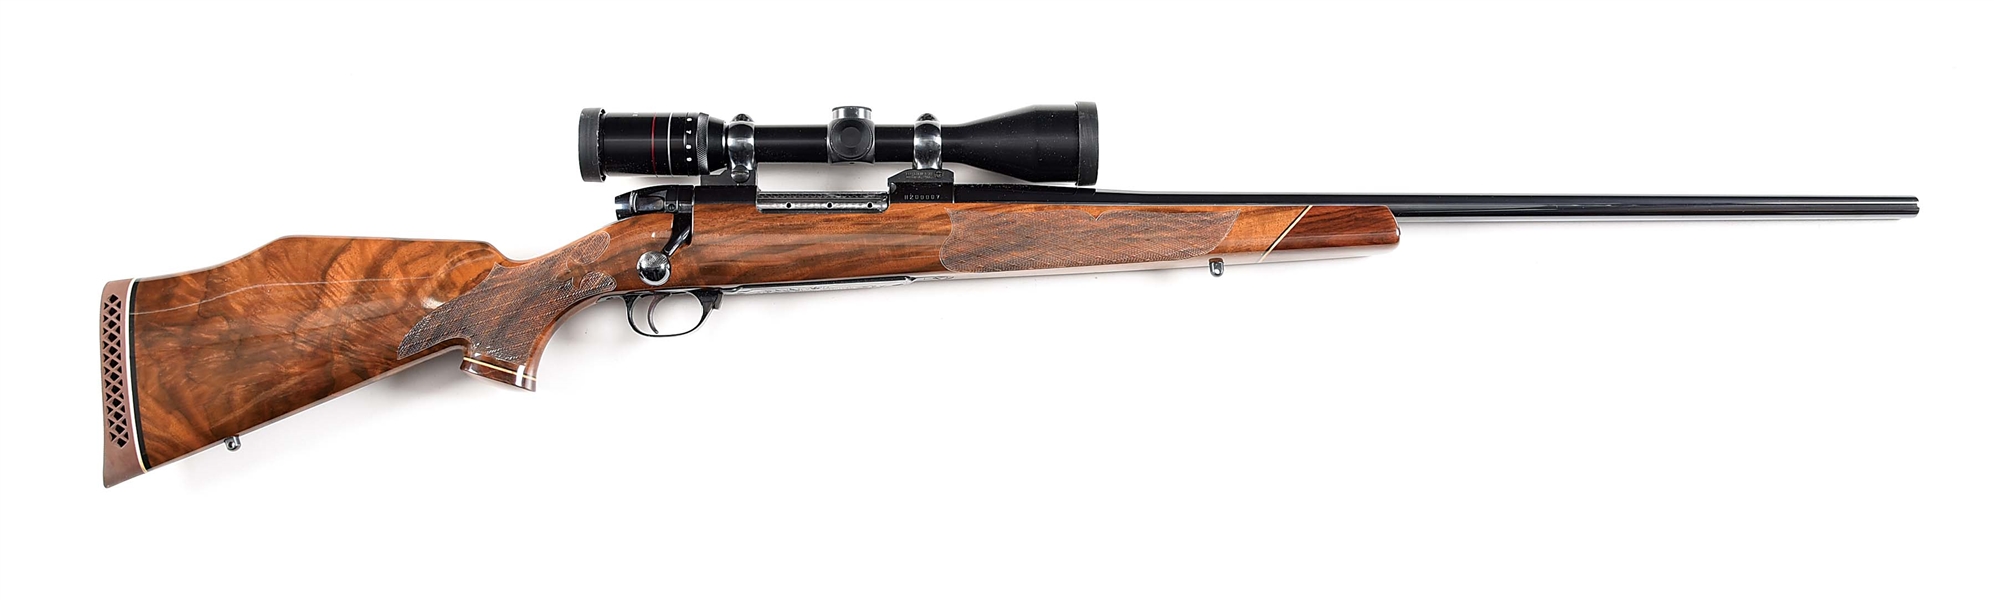 (M) WEATHERBY MARK V BOLT ACTION RIFLE IN .378 WEATHERBY MAGNUM.